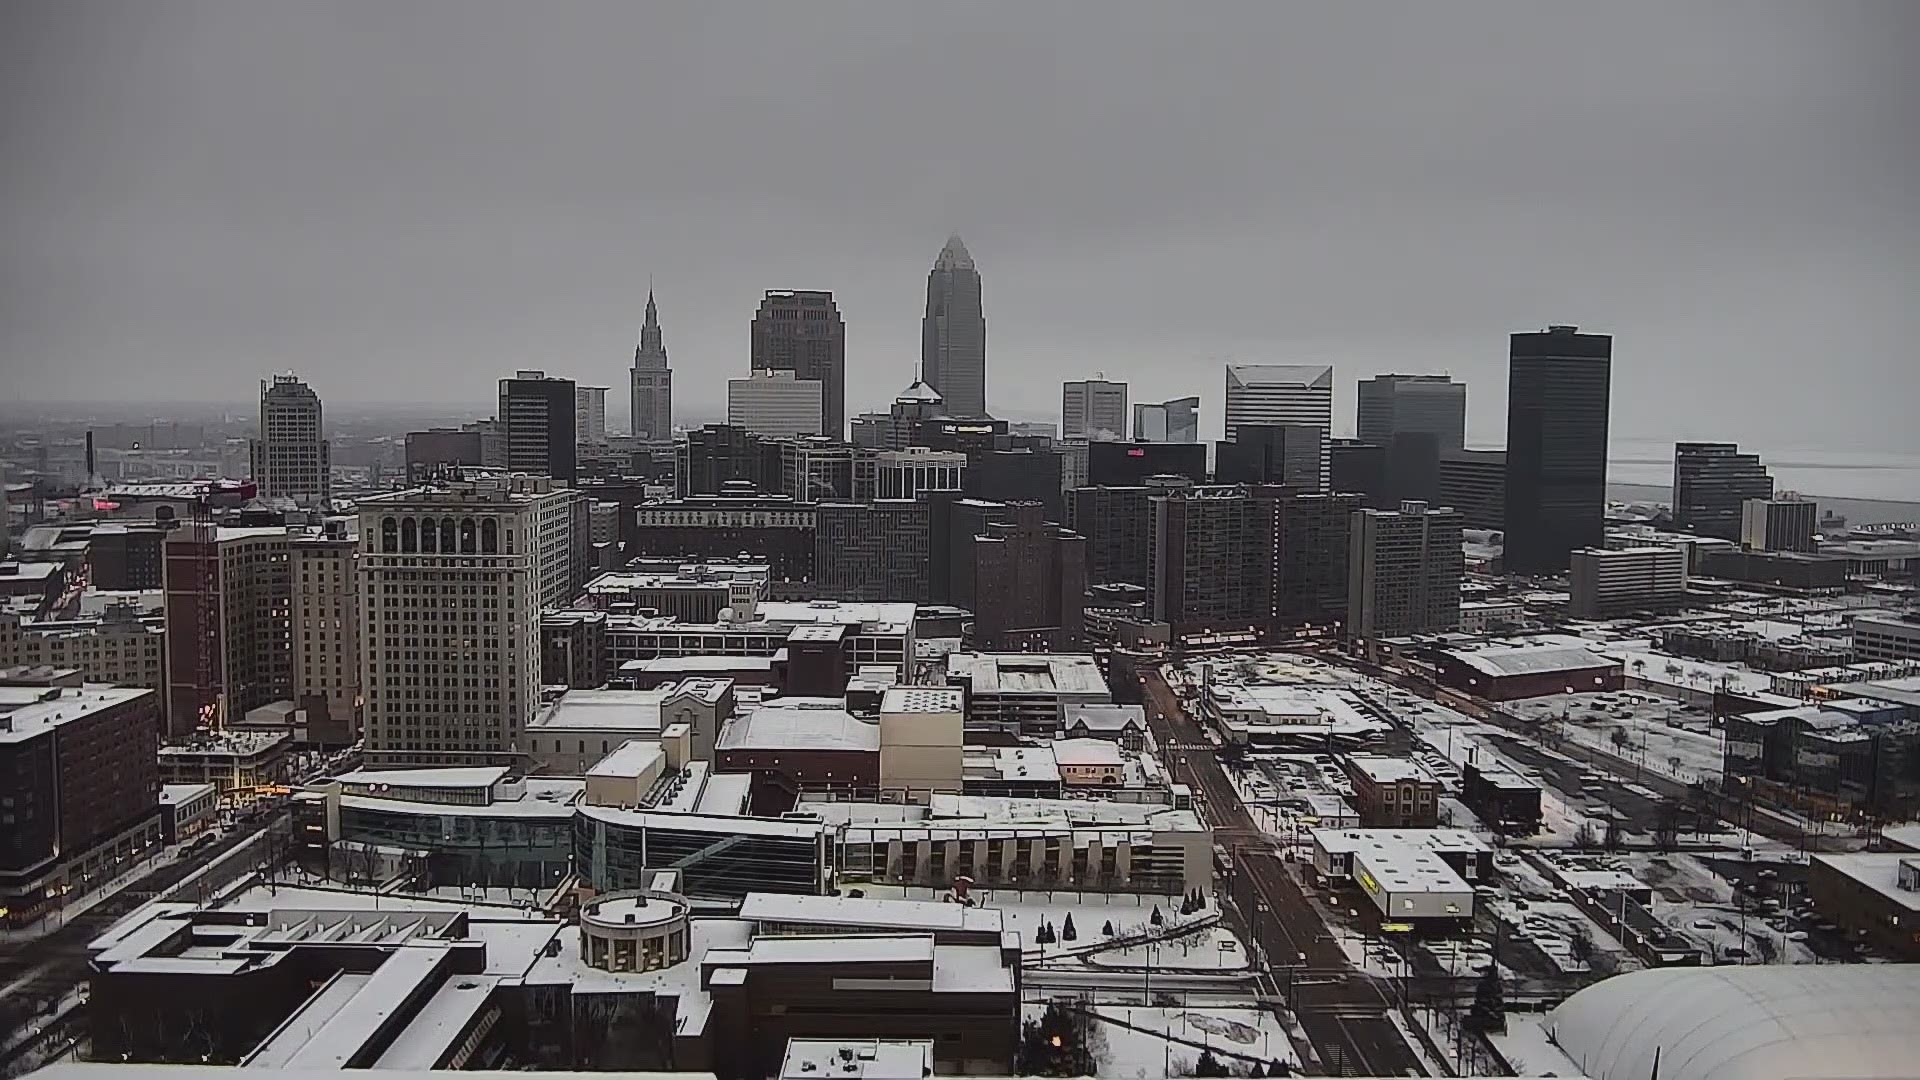 A pretty cool looking all day Cleveland weather time-lapse for today (2/18/19) from the Channel 3 CSU Skycam. We saw clouds, sun and lake effect snow squalls. #3weather